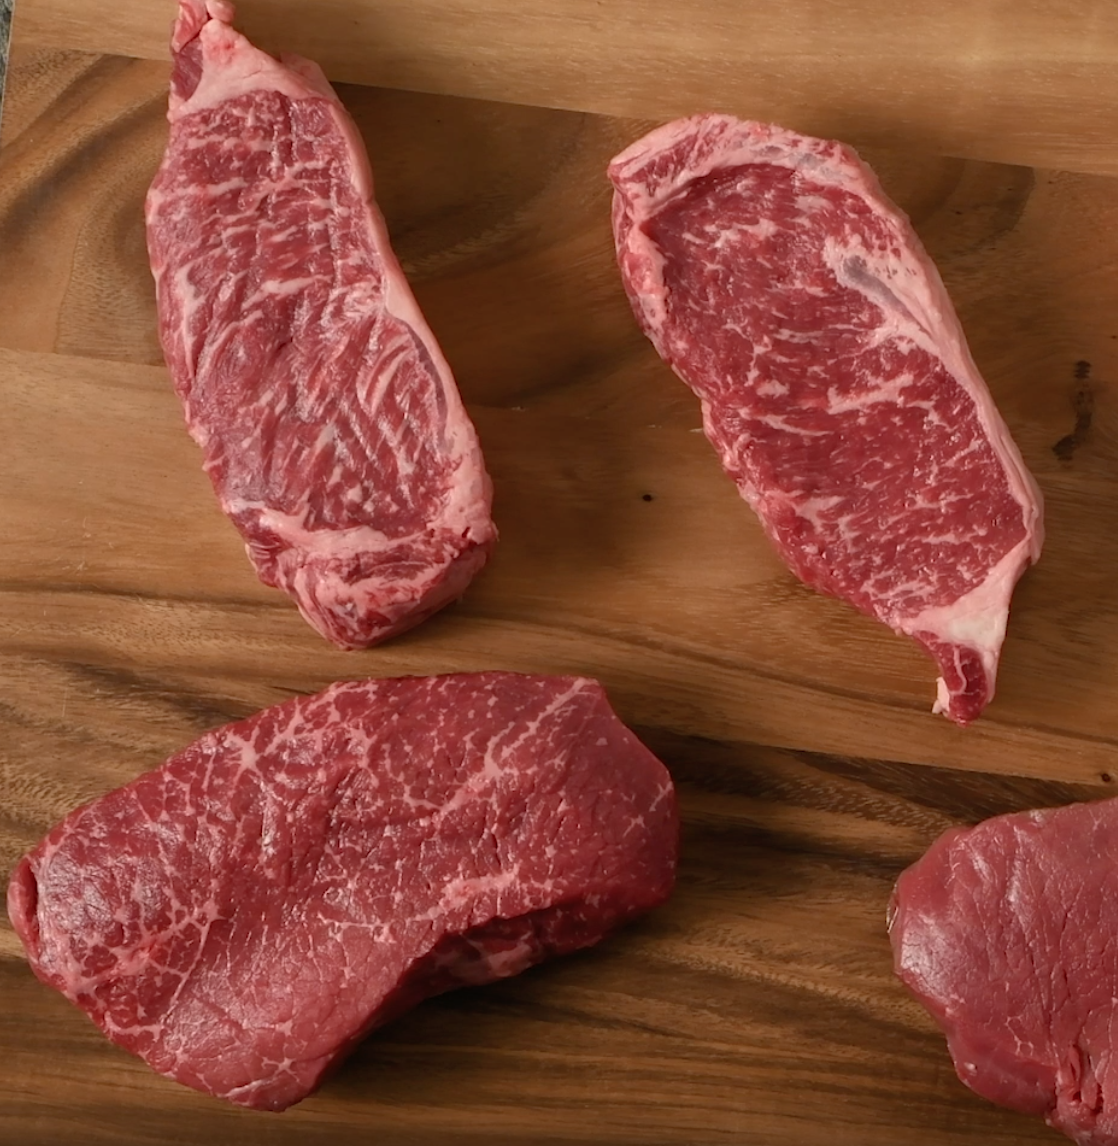 What to look for when buying beef